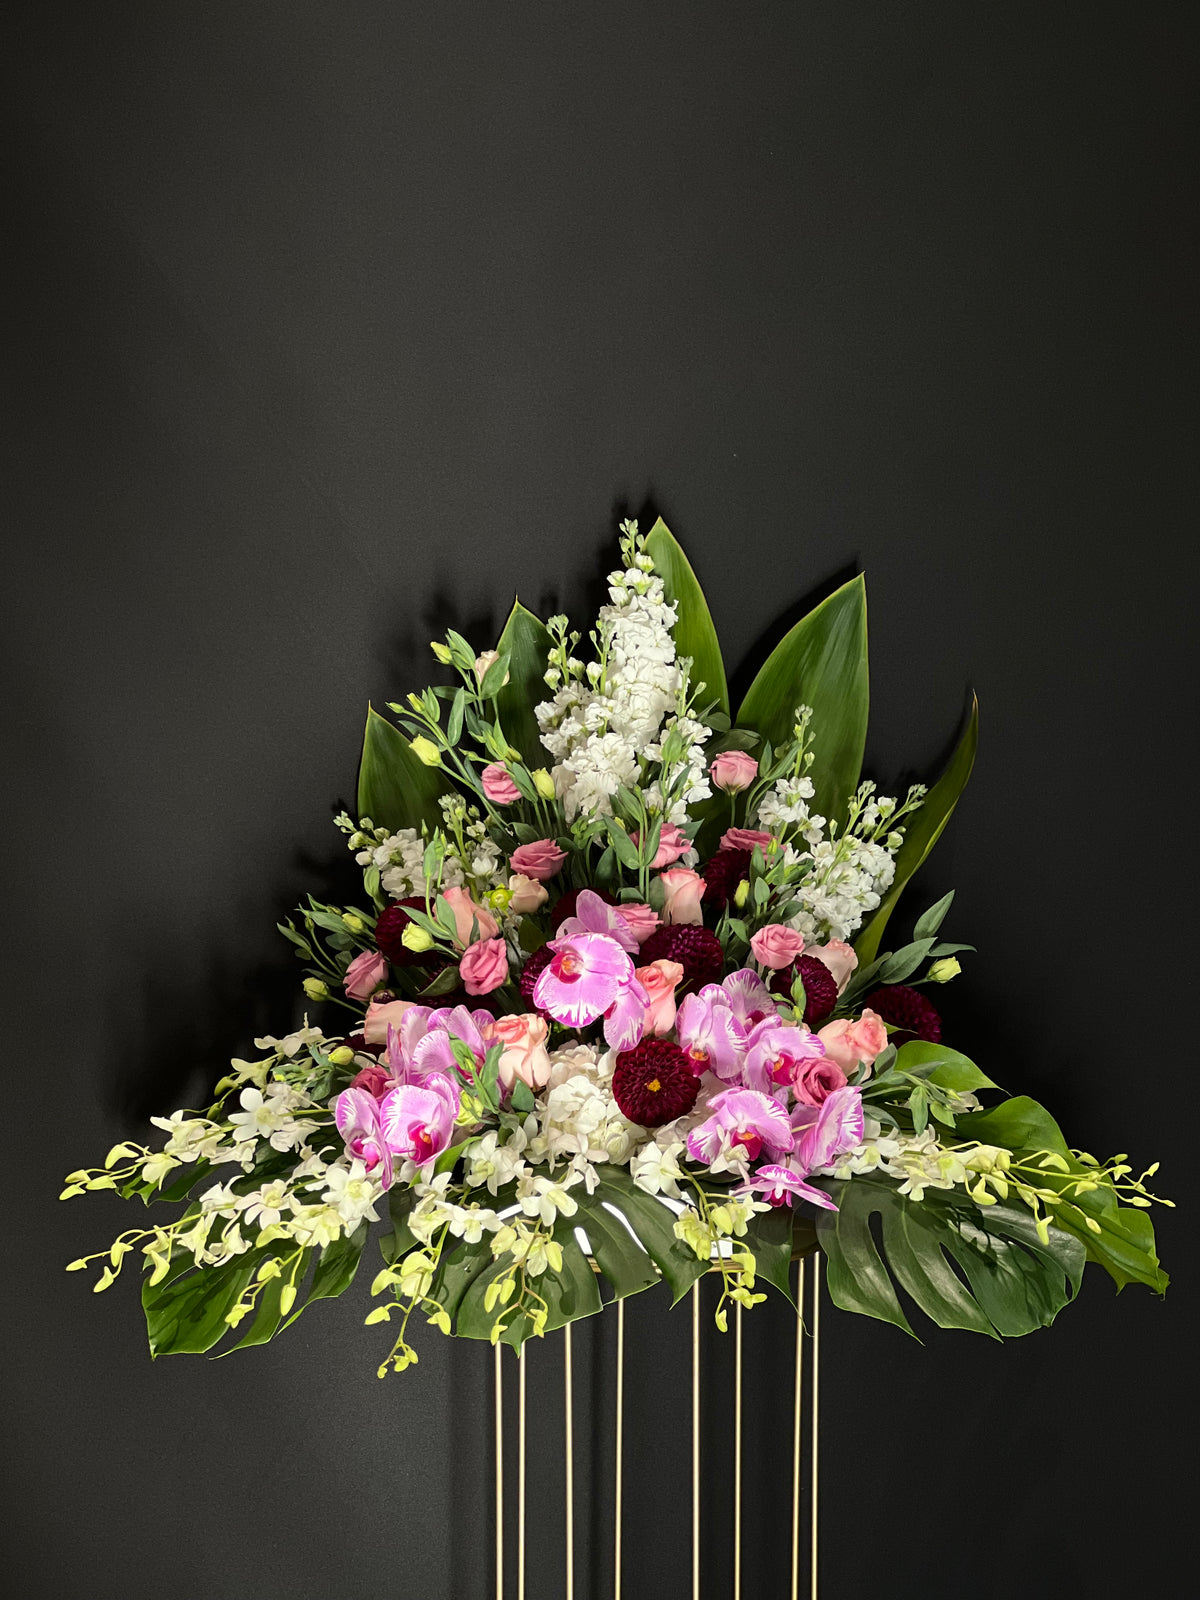 Burgundy Elegance Floral Arrangement - A harmonious blend of white and burgundy Stocks, Roses, Lisianthus, and regal Purple Phalaenopsis Orchids, perfect for expressing congratulations and positive feelings.